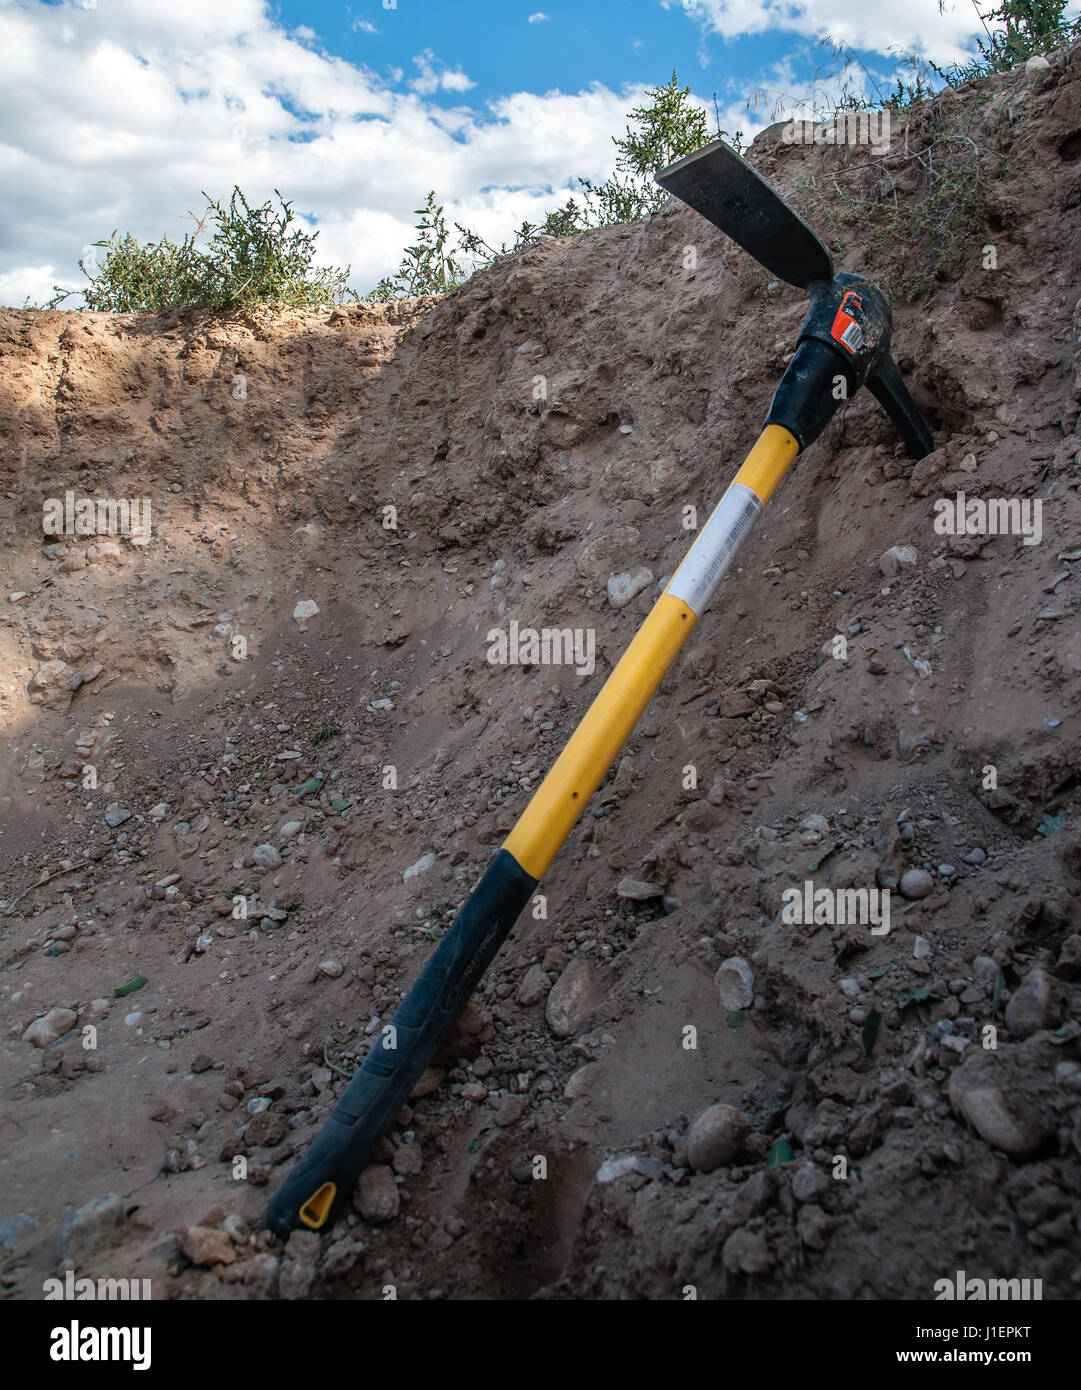 A pick axe leans against the dirt in a large pit. Stock Photo